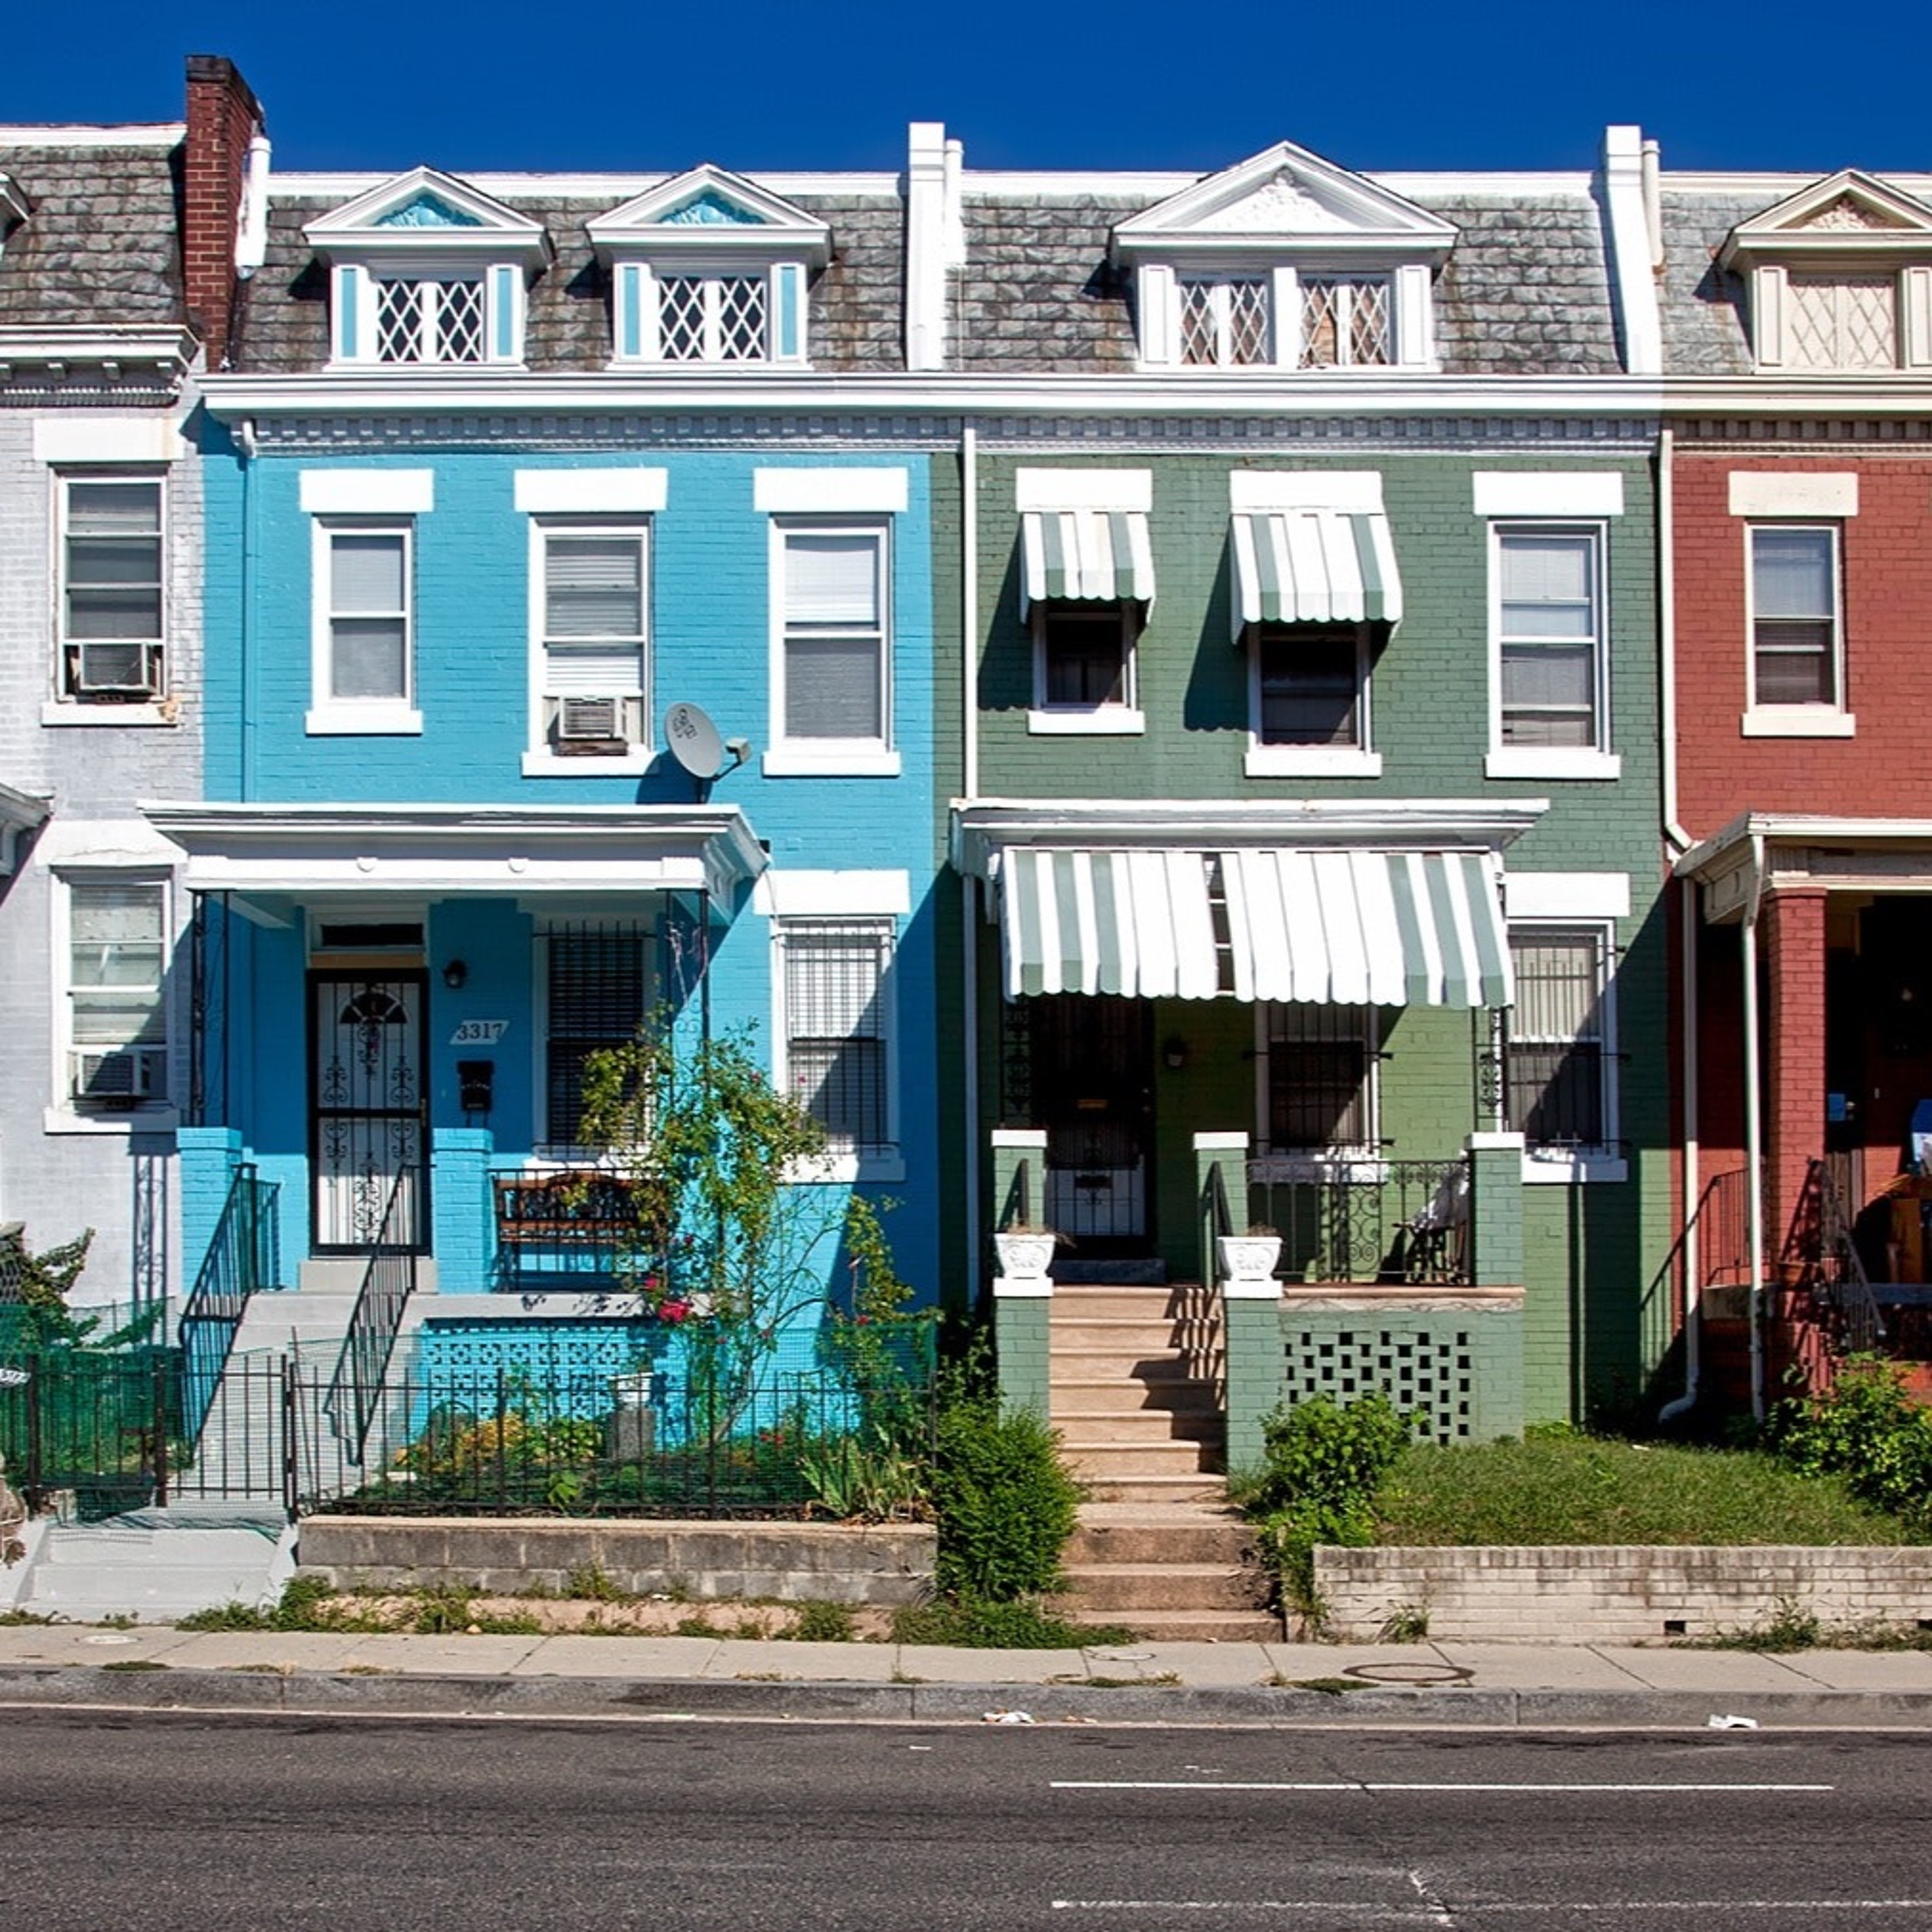 How Public Policy Intentionally Segregated American Homeowners